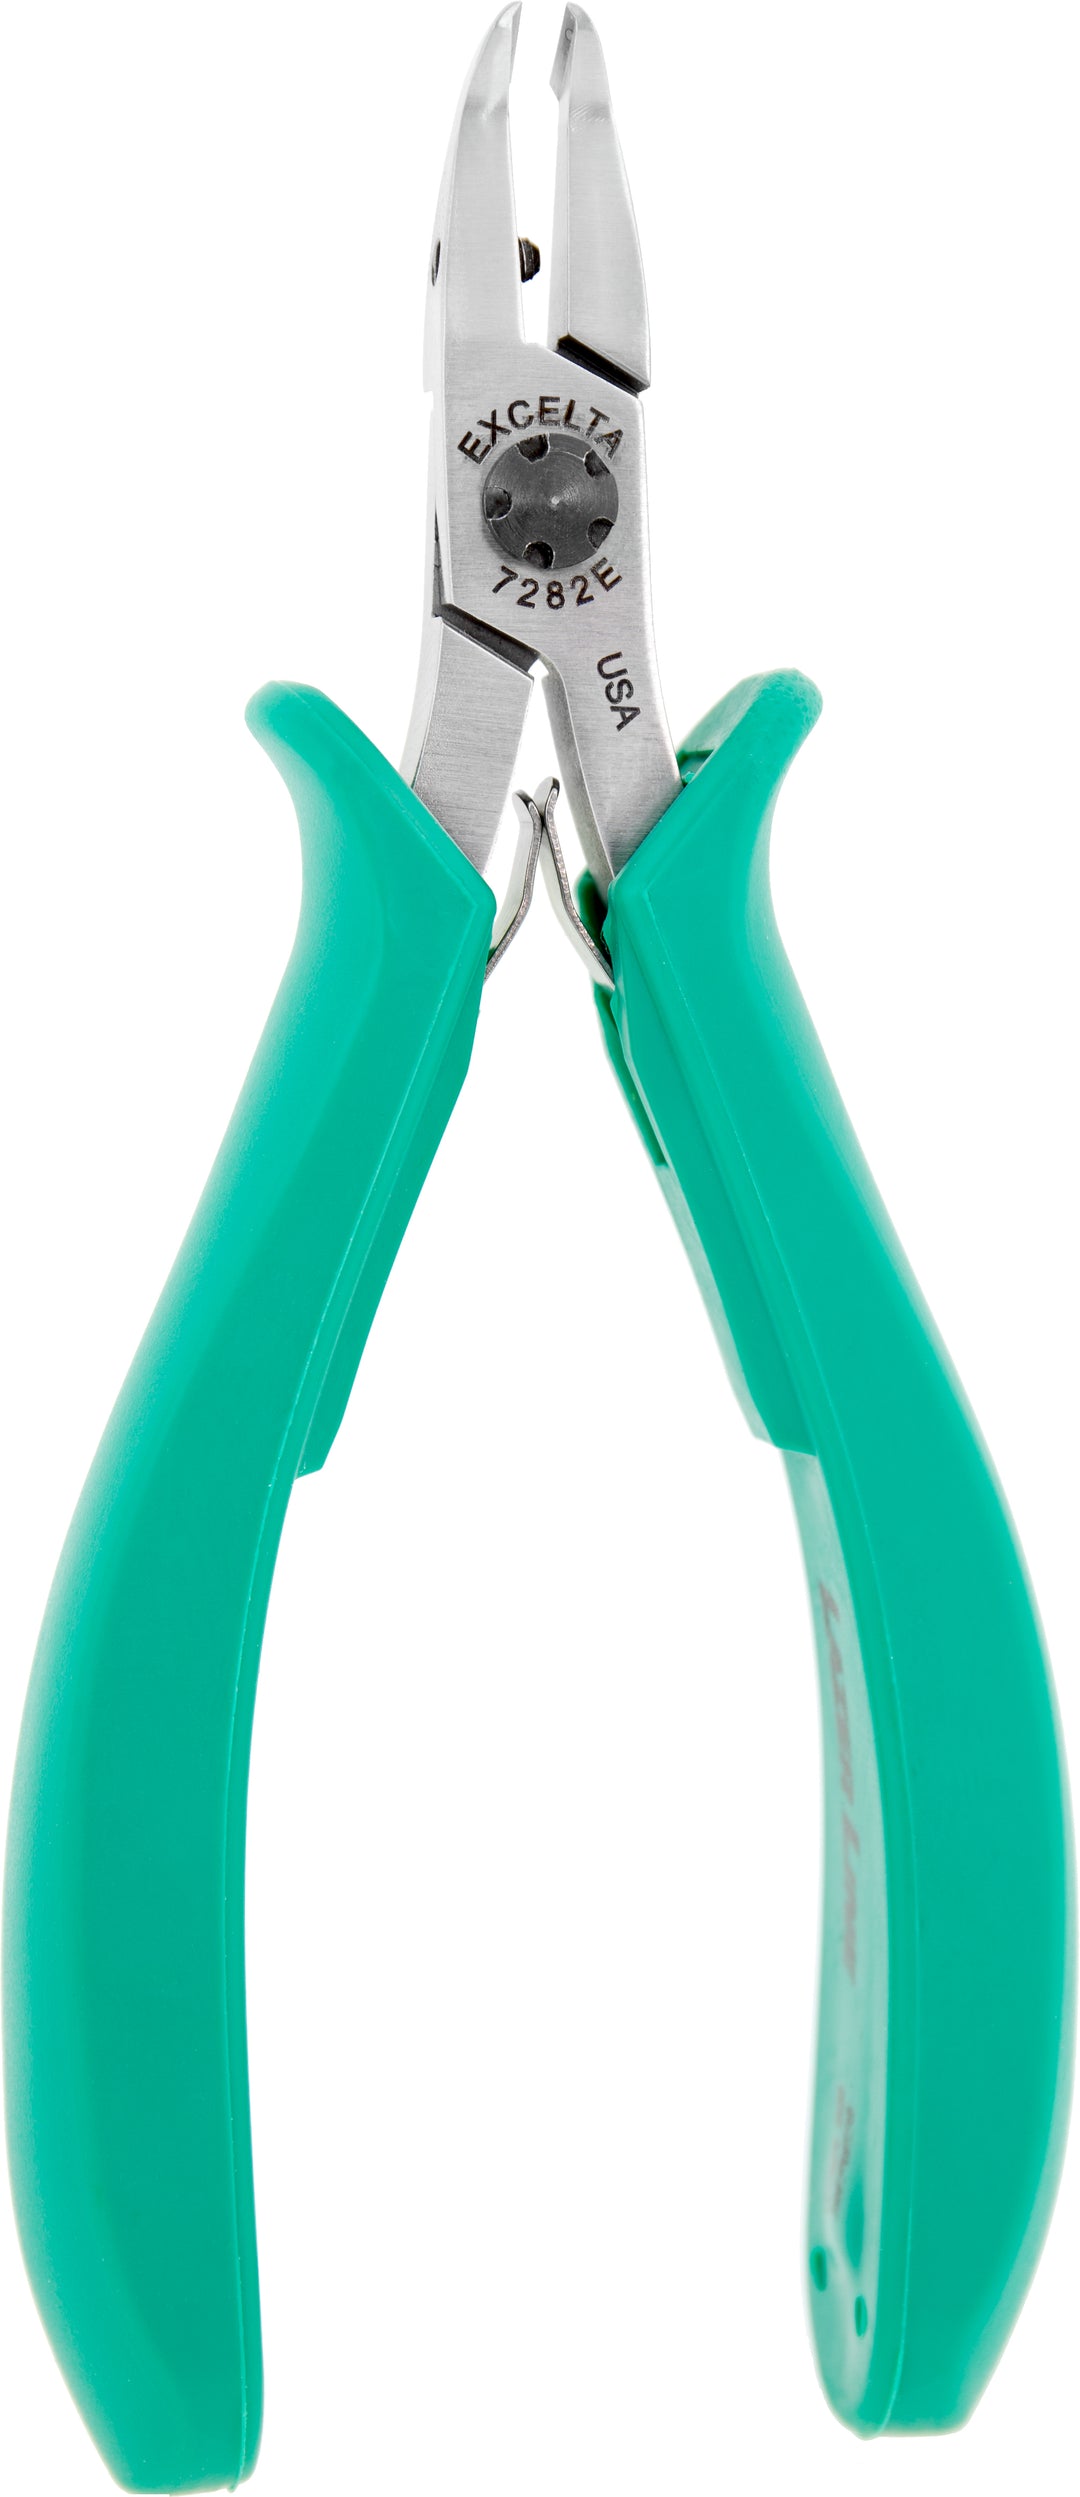 Excelta 7282E Cutters - 50° Angulated Head - Blade Length .22" - Short Handle